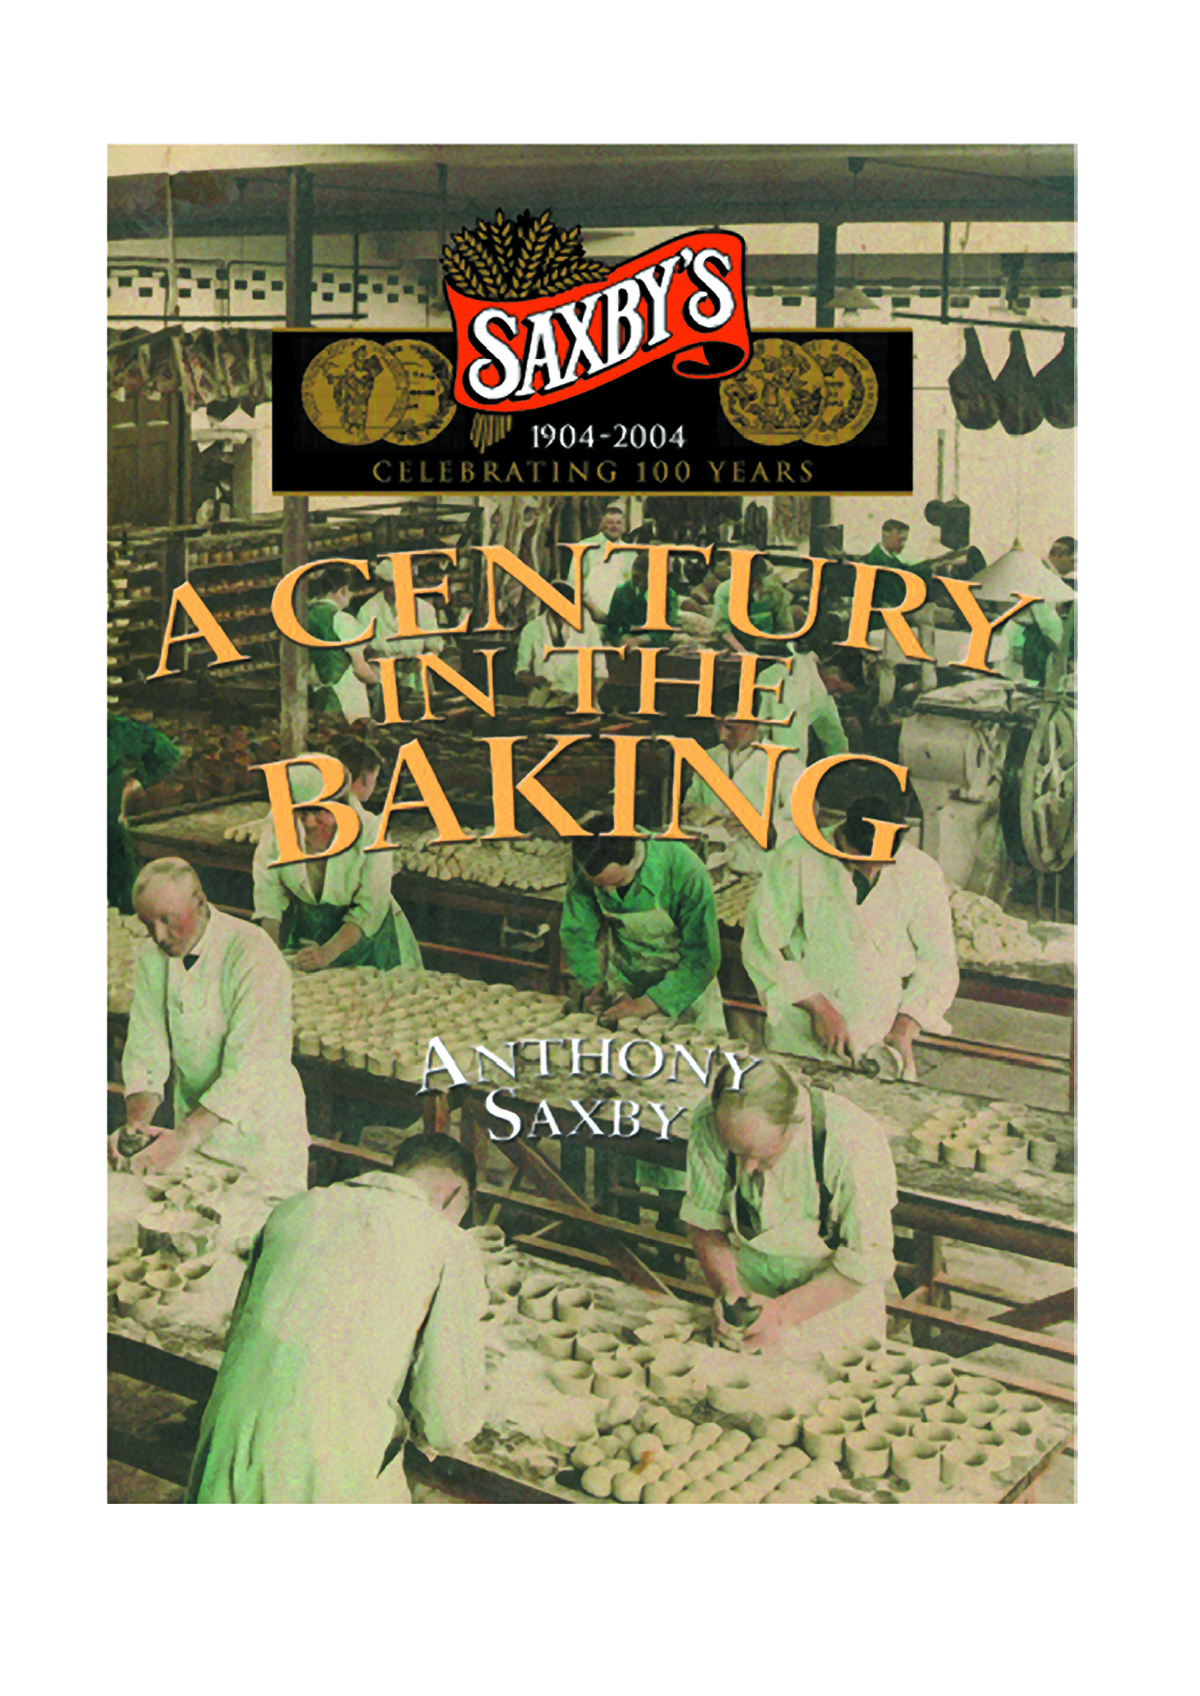 2446 - A Century in the Baking